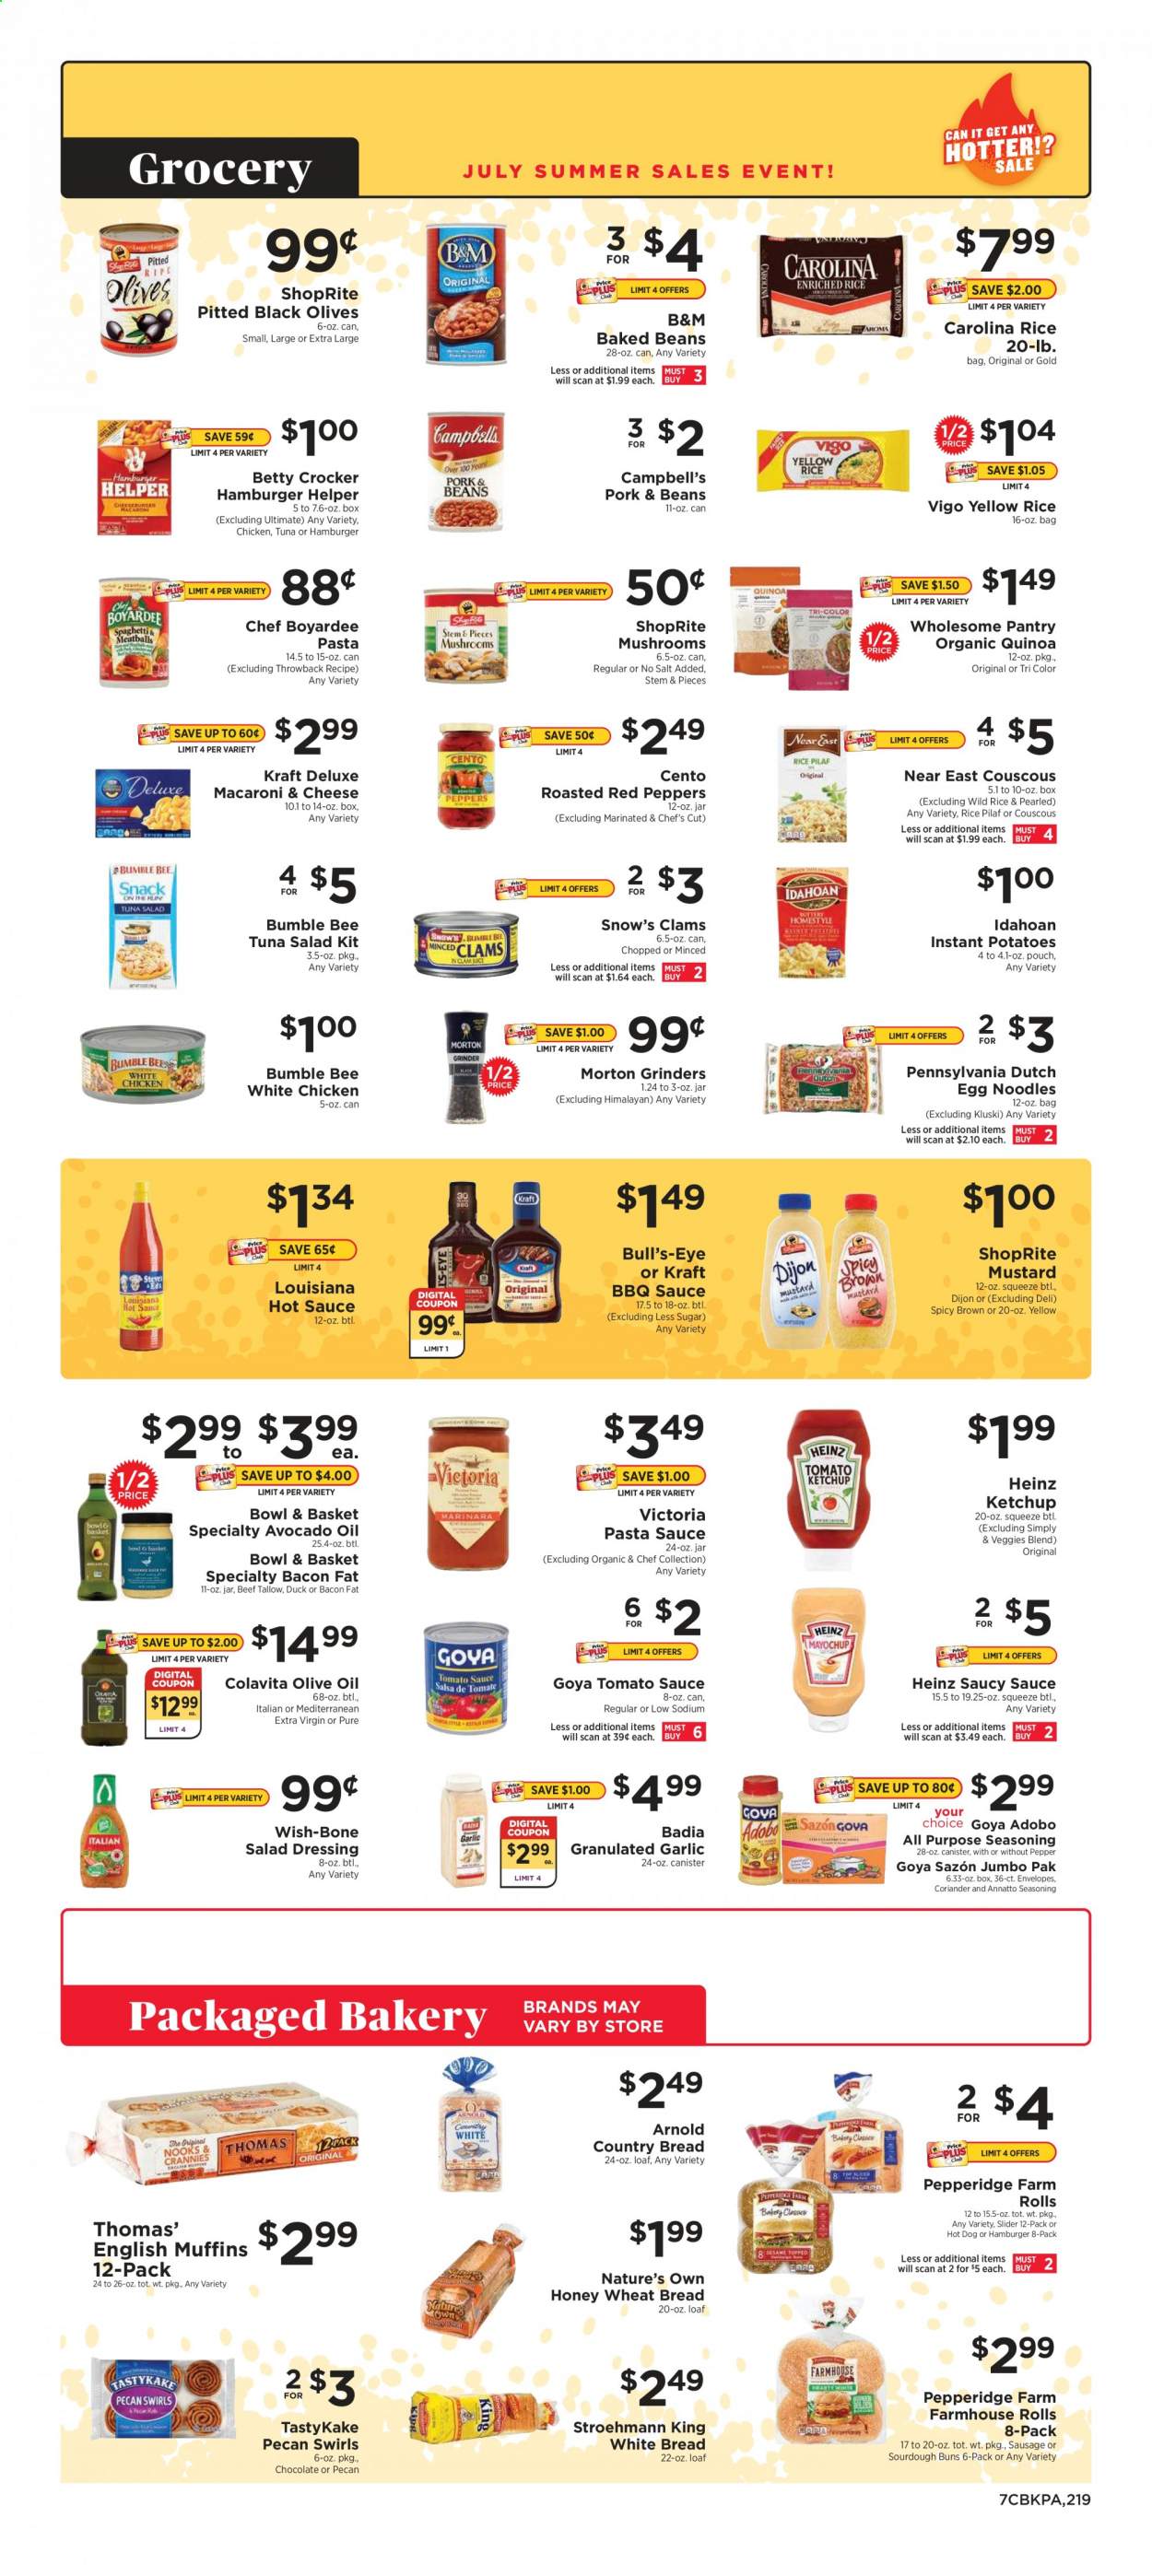 thumbnail - ShopRite Flyer - 07/04/2021 - 07/10/2021 - Sales products - bread, english muffins, wheat bread, white bread, dinner rolls, buns, Bowl & Basket, pastries, red peppers, clams, Campbell's, macaroni & cheese, hot dog, pasta sauce, Bumble Bee, sauce, noodles, Kraft®, ready meal, tuna salad, tomato sauce, Heinz, baked beans, Goya, Badia, Chef Boyardee, couscous, quinoa, rice, egg noodles, spice, coriander, adobo sauce, BBQ sauce, mustard, salad dressing, hot sauce, ketchup, dressing, salsa, avocado oil, extra virgin olive oil, olive oil, poultry meat, envelope, Nature's Own. Page 9.